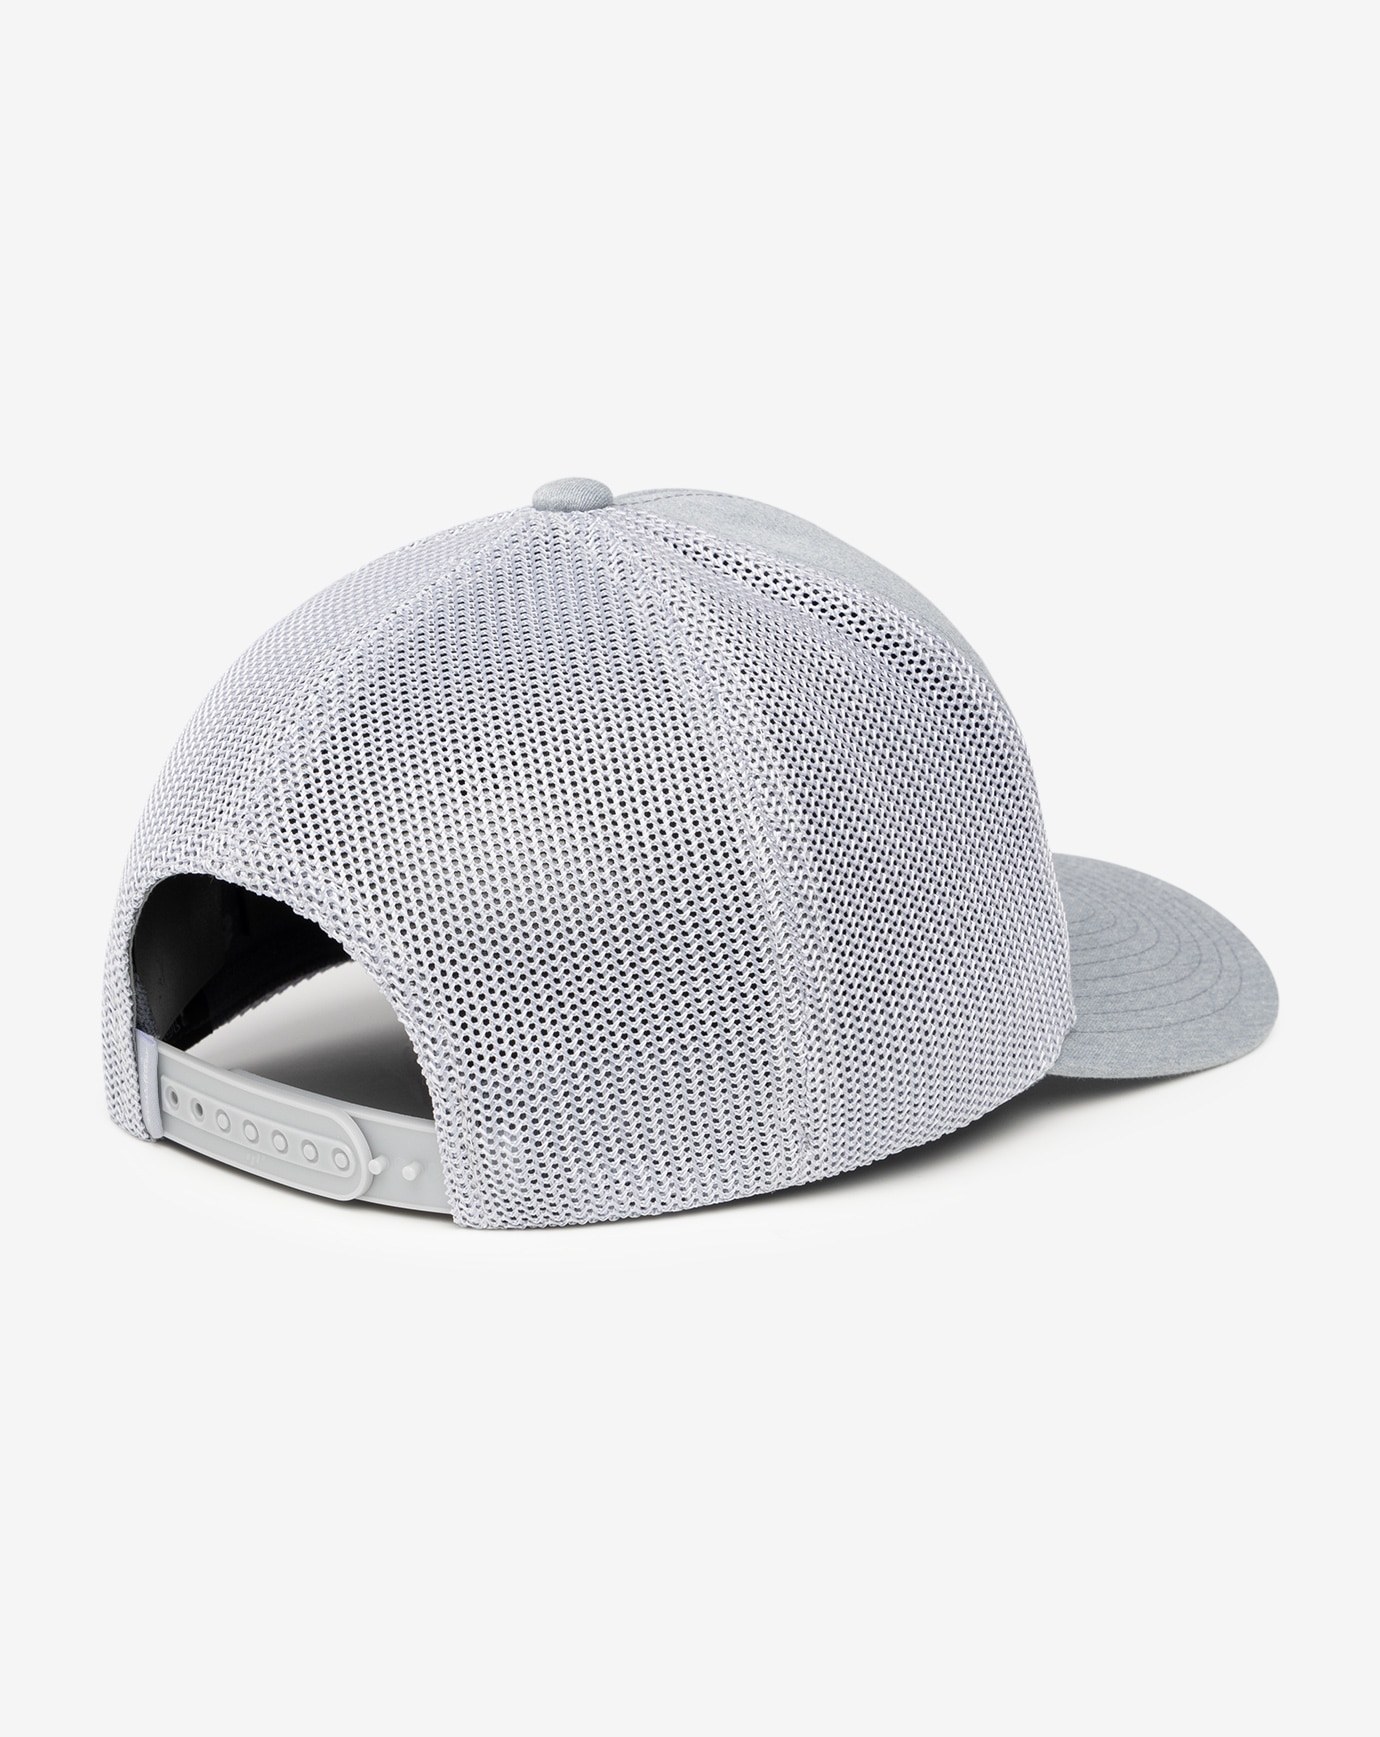 CAN PATCH SNAPBACK HAT Image Thumbnail 3